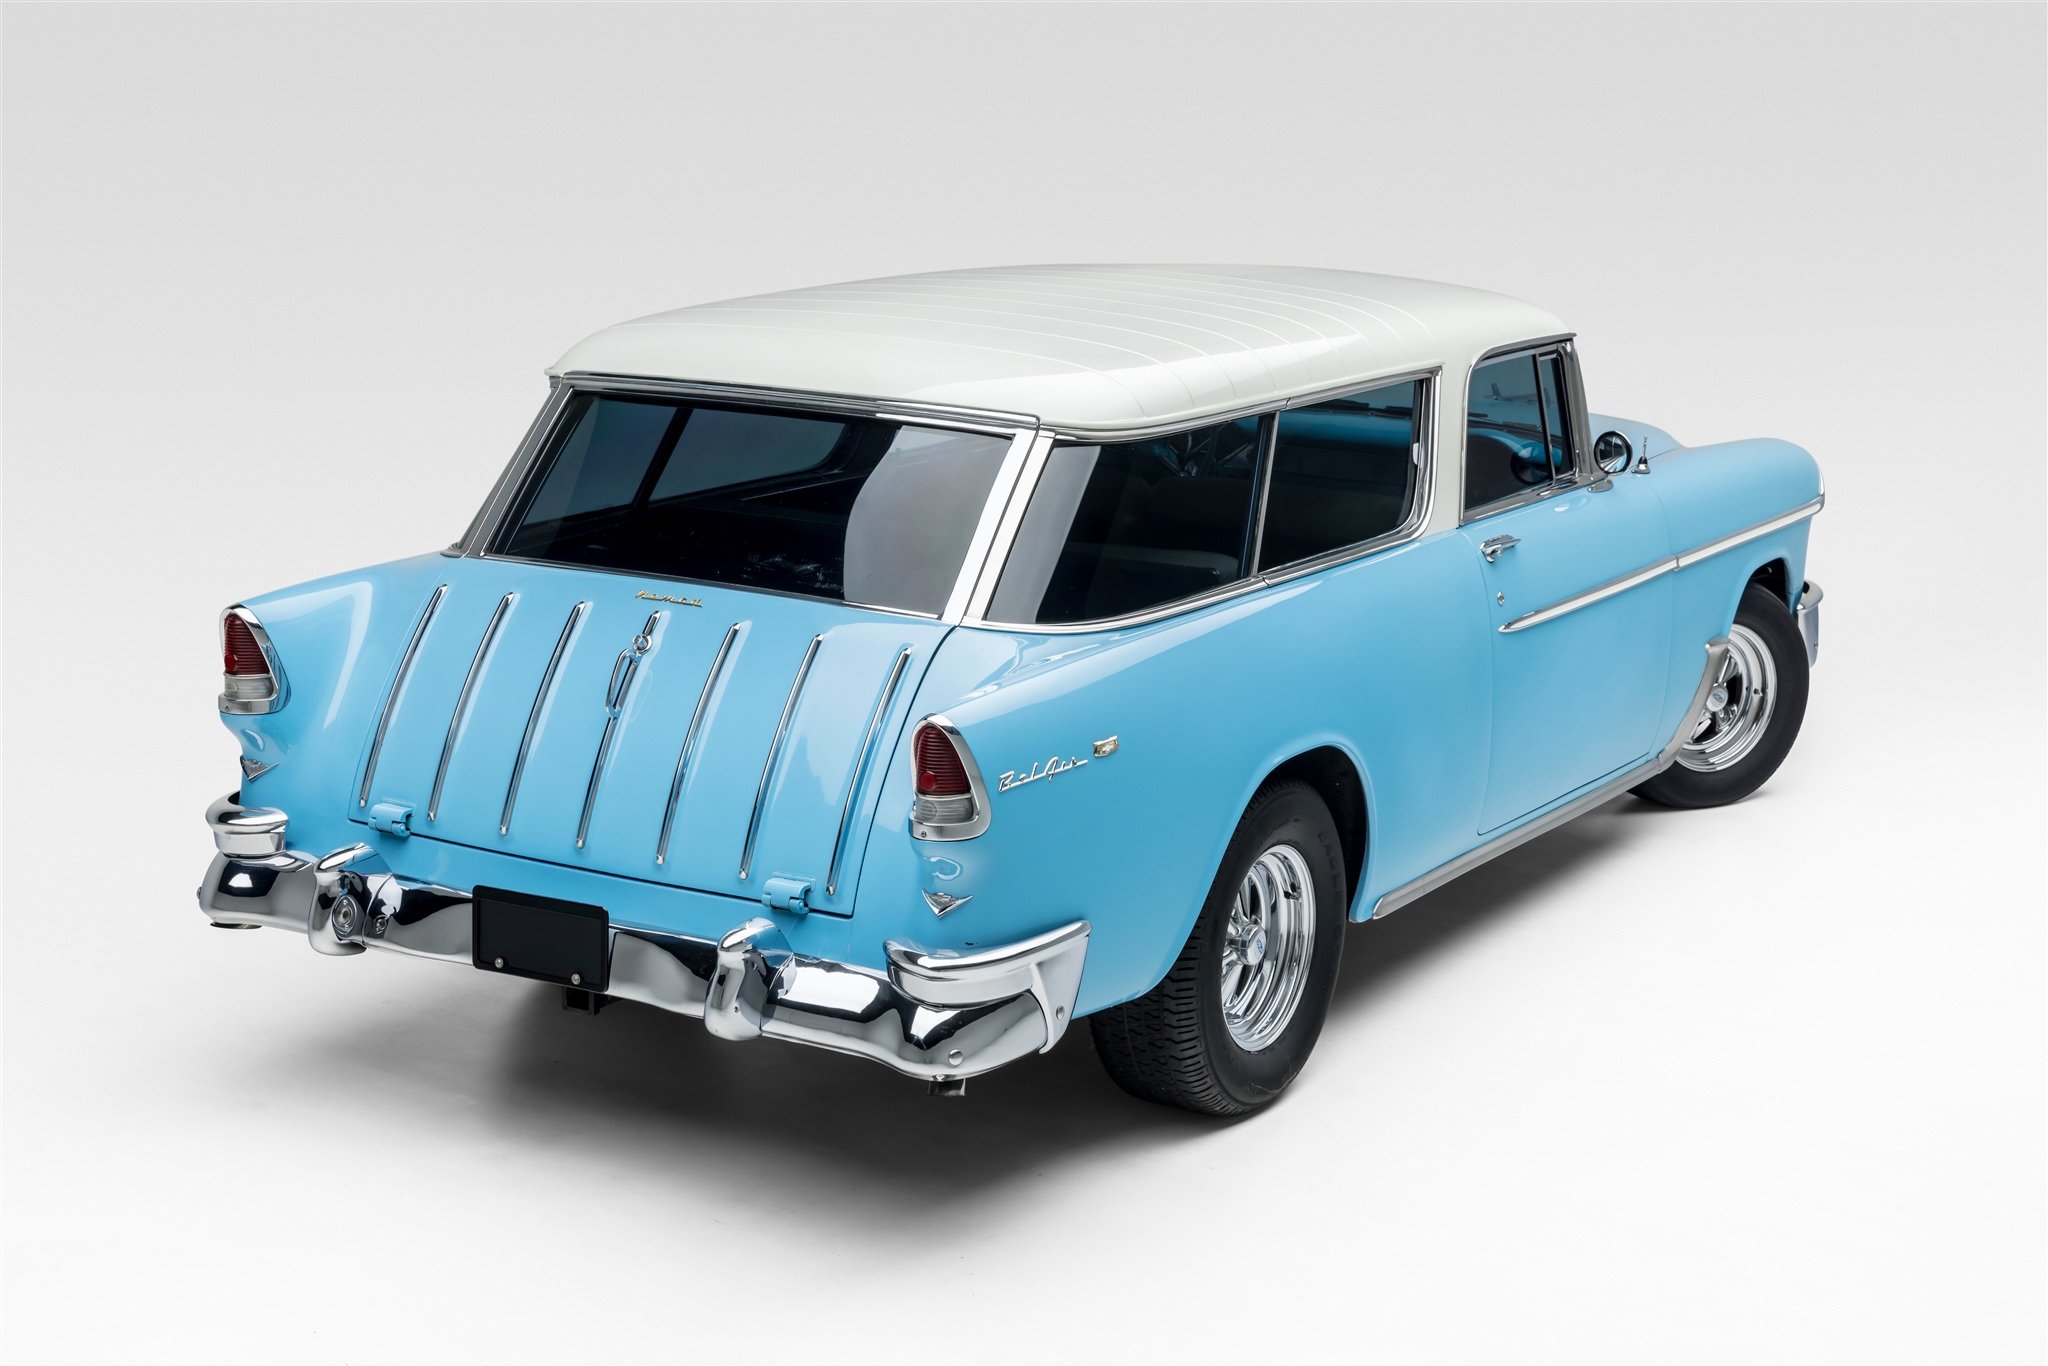 Bruce Willis' Chevrolet Nomad Sport Wagon Is For Sale